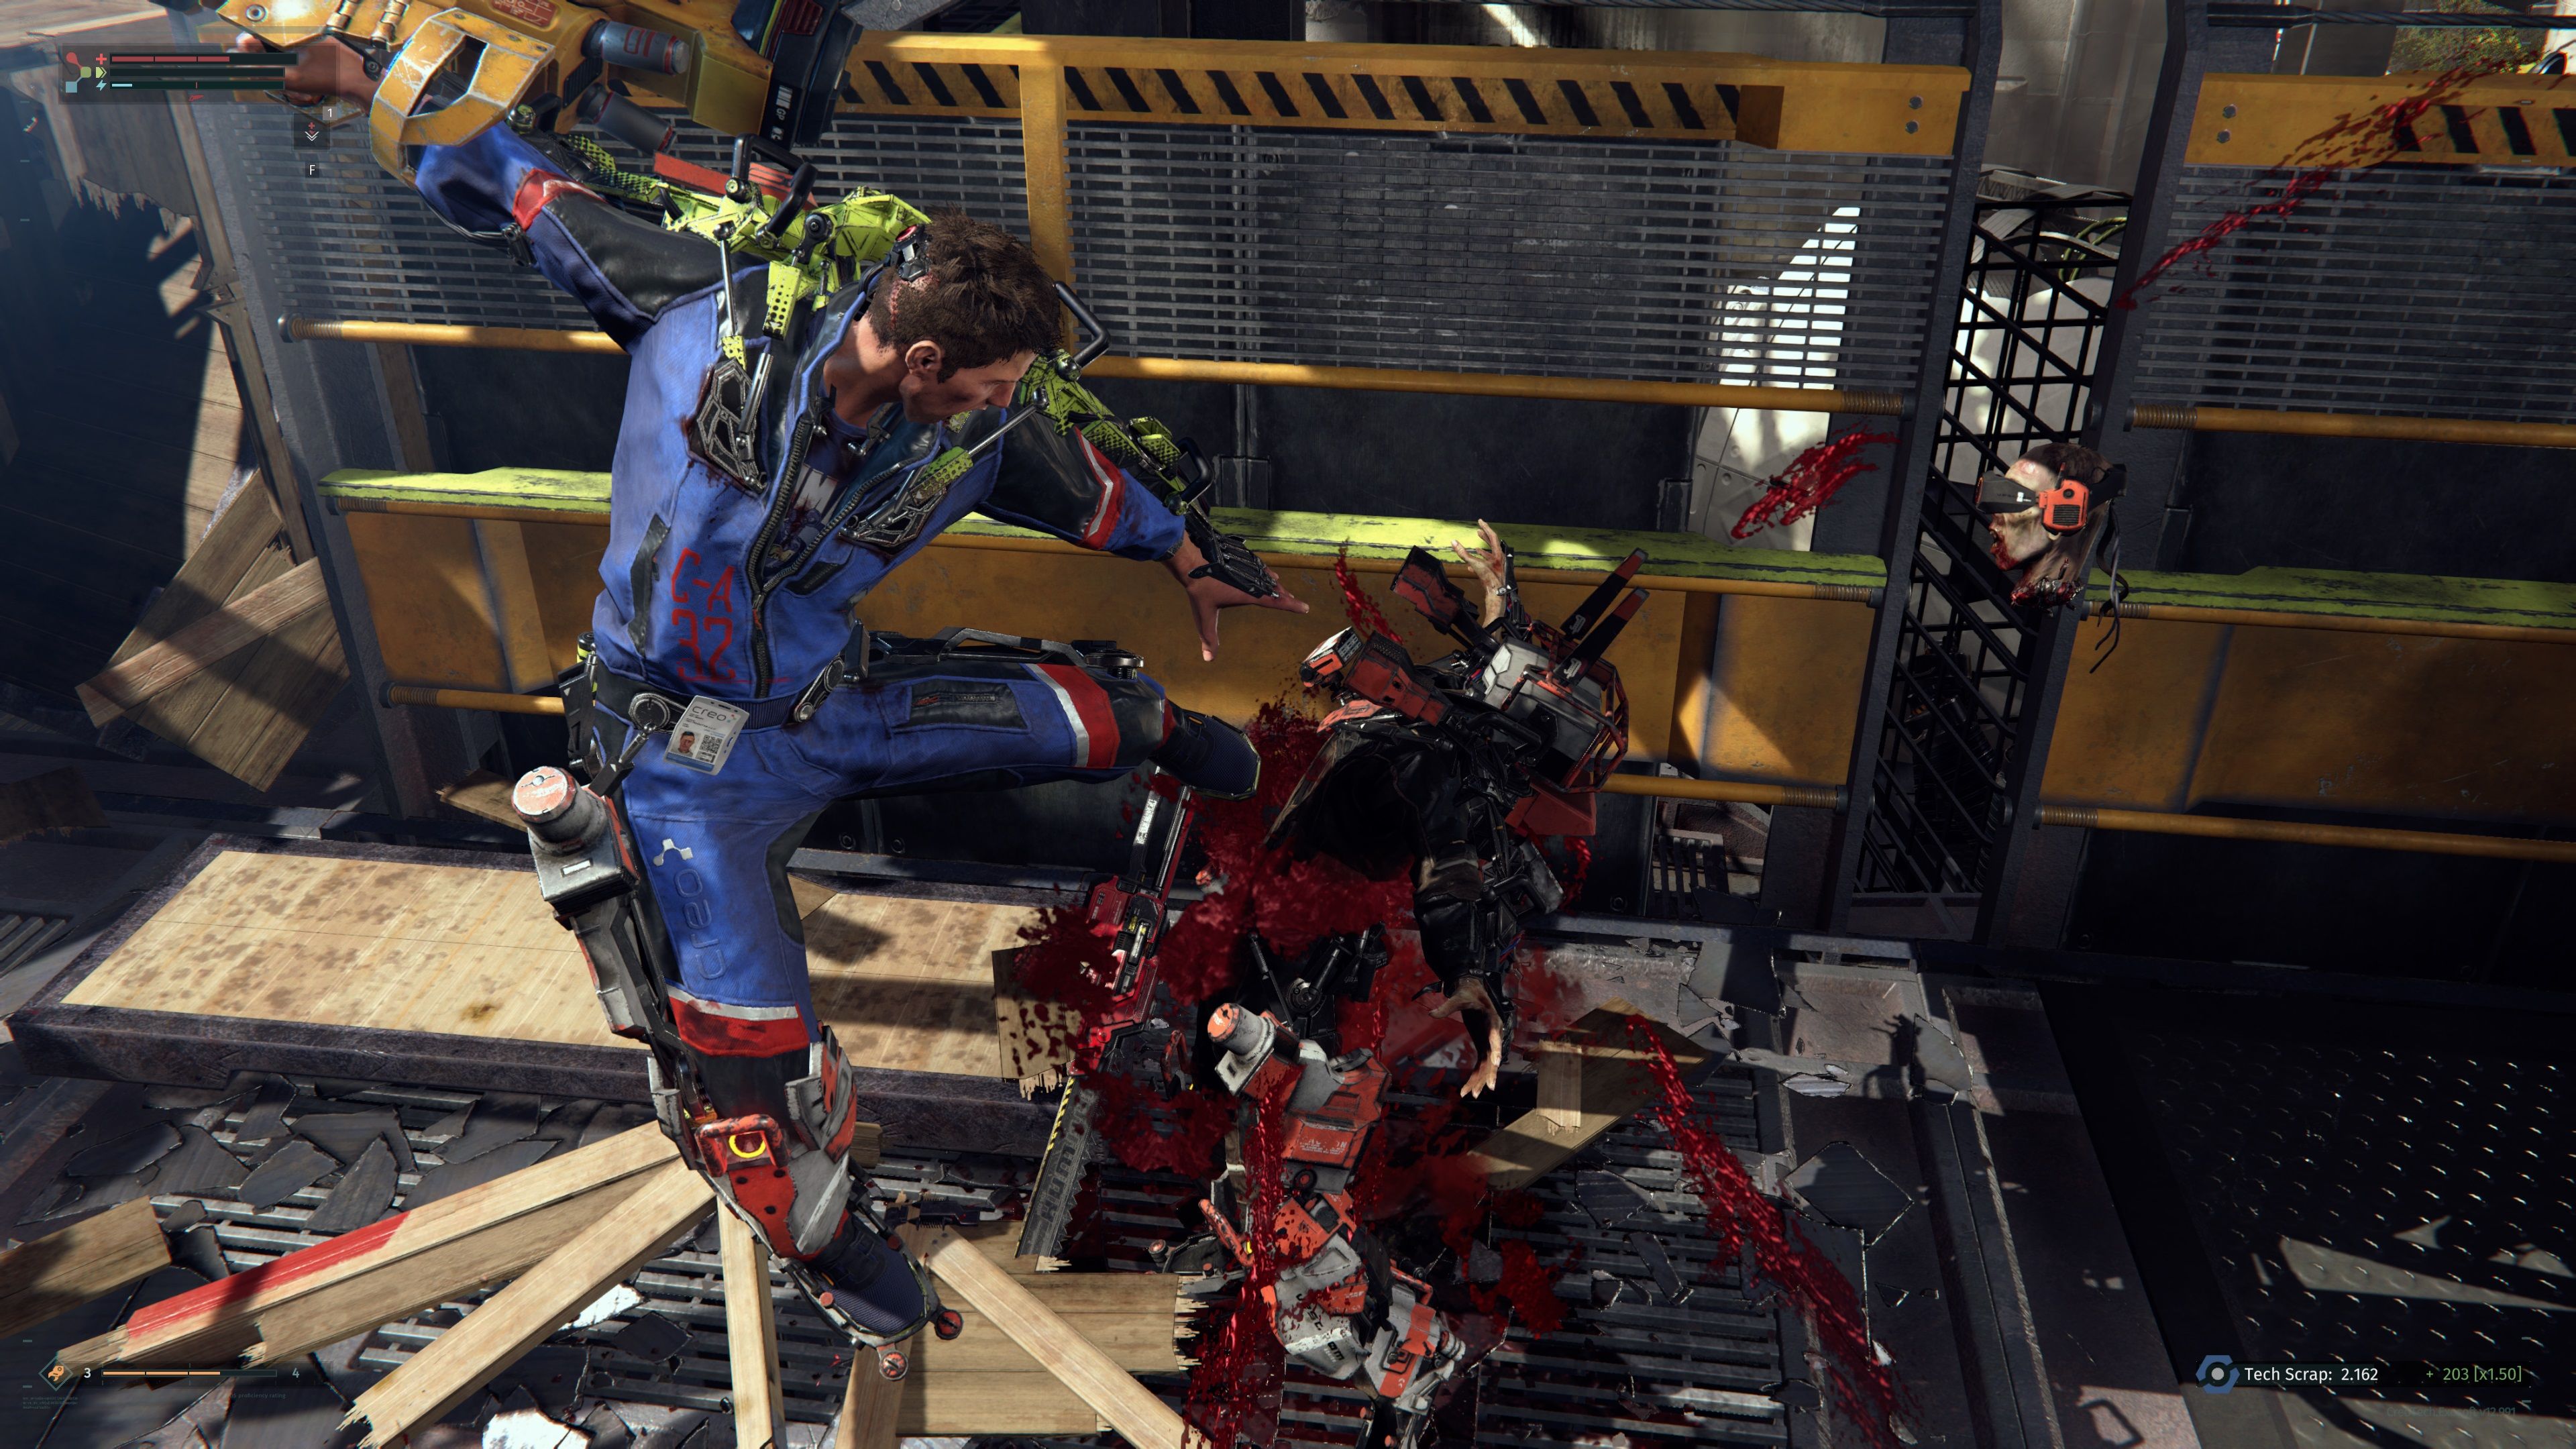 Awesome The Surge Fighting Game 4K Sci Fi Action 3840x2160